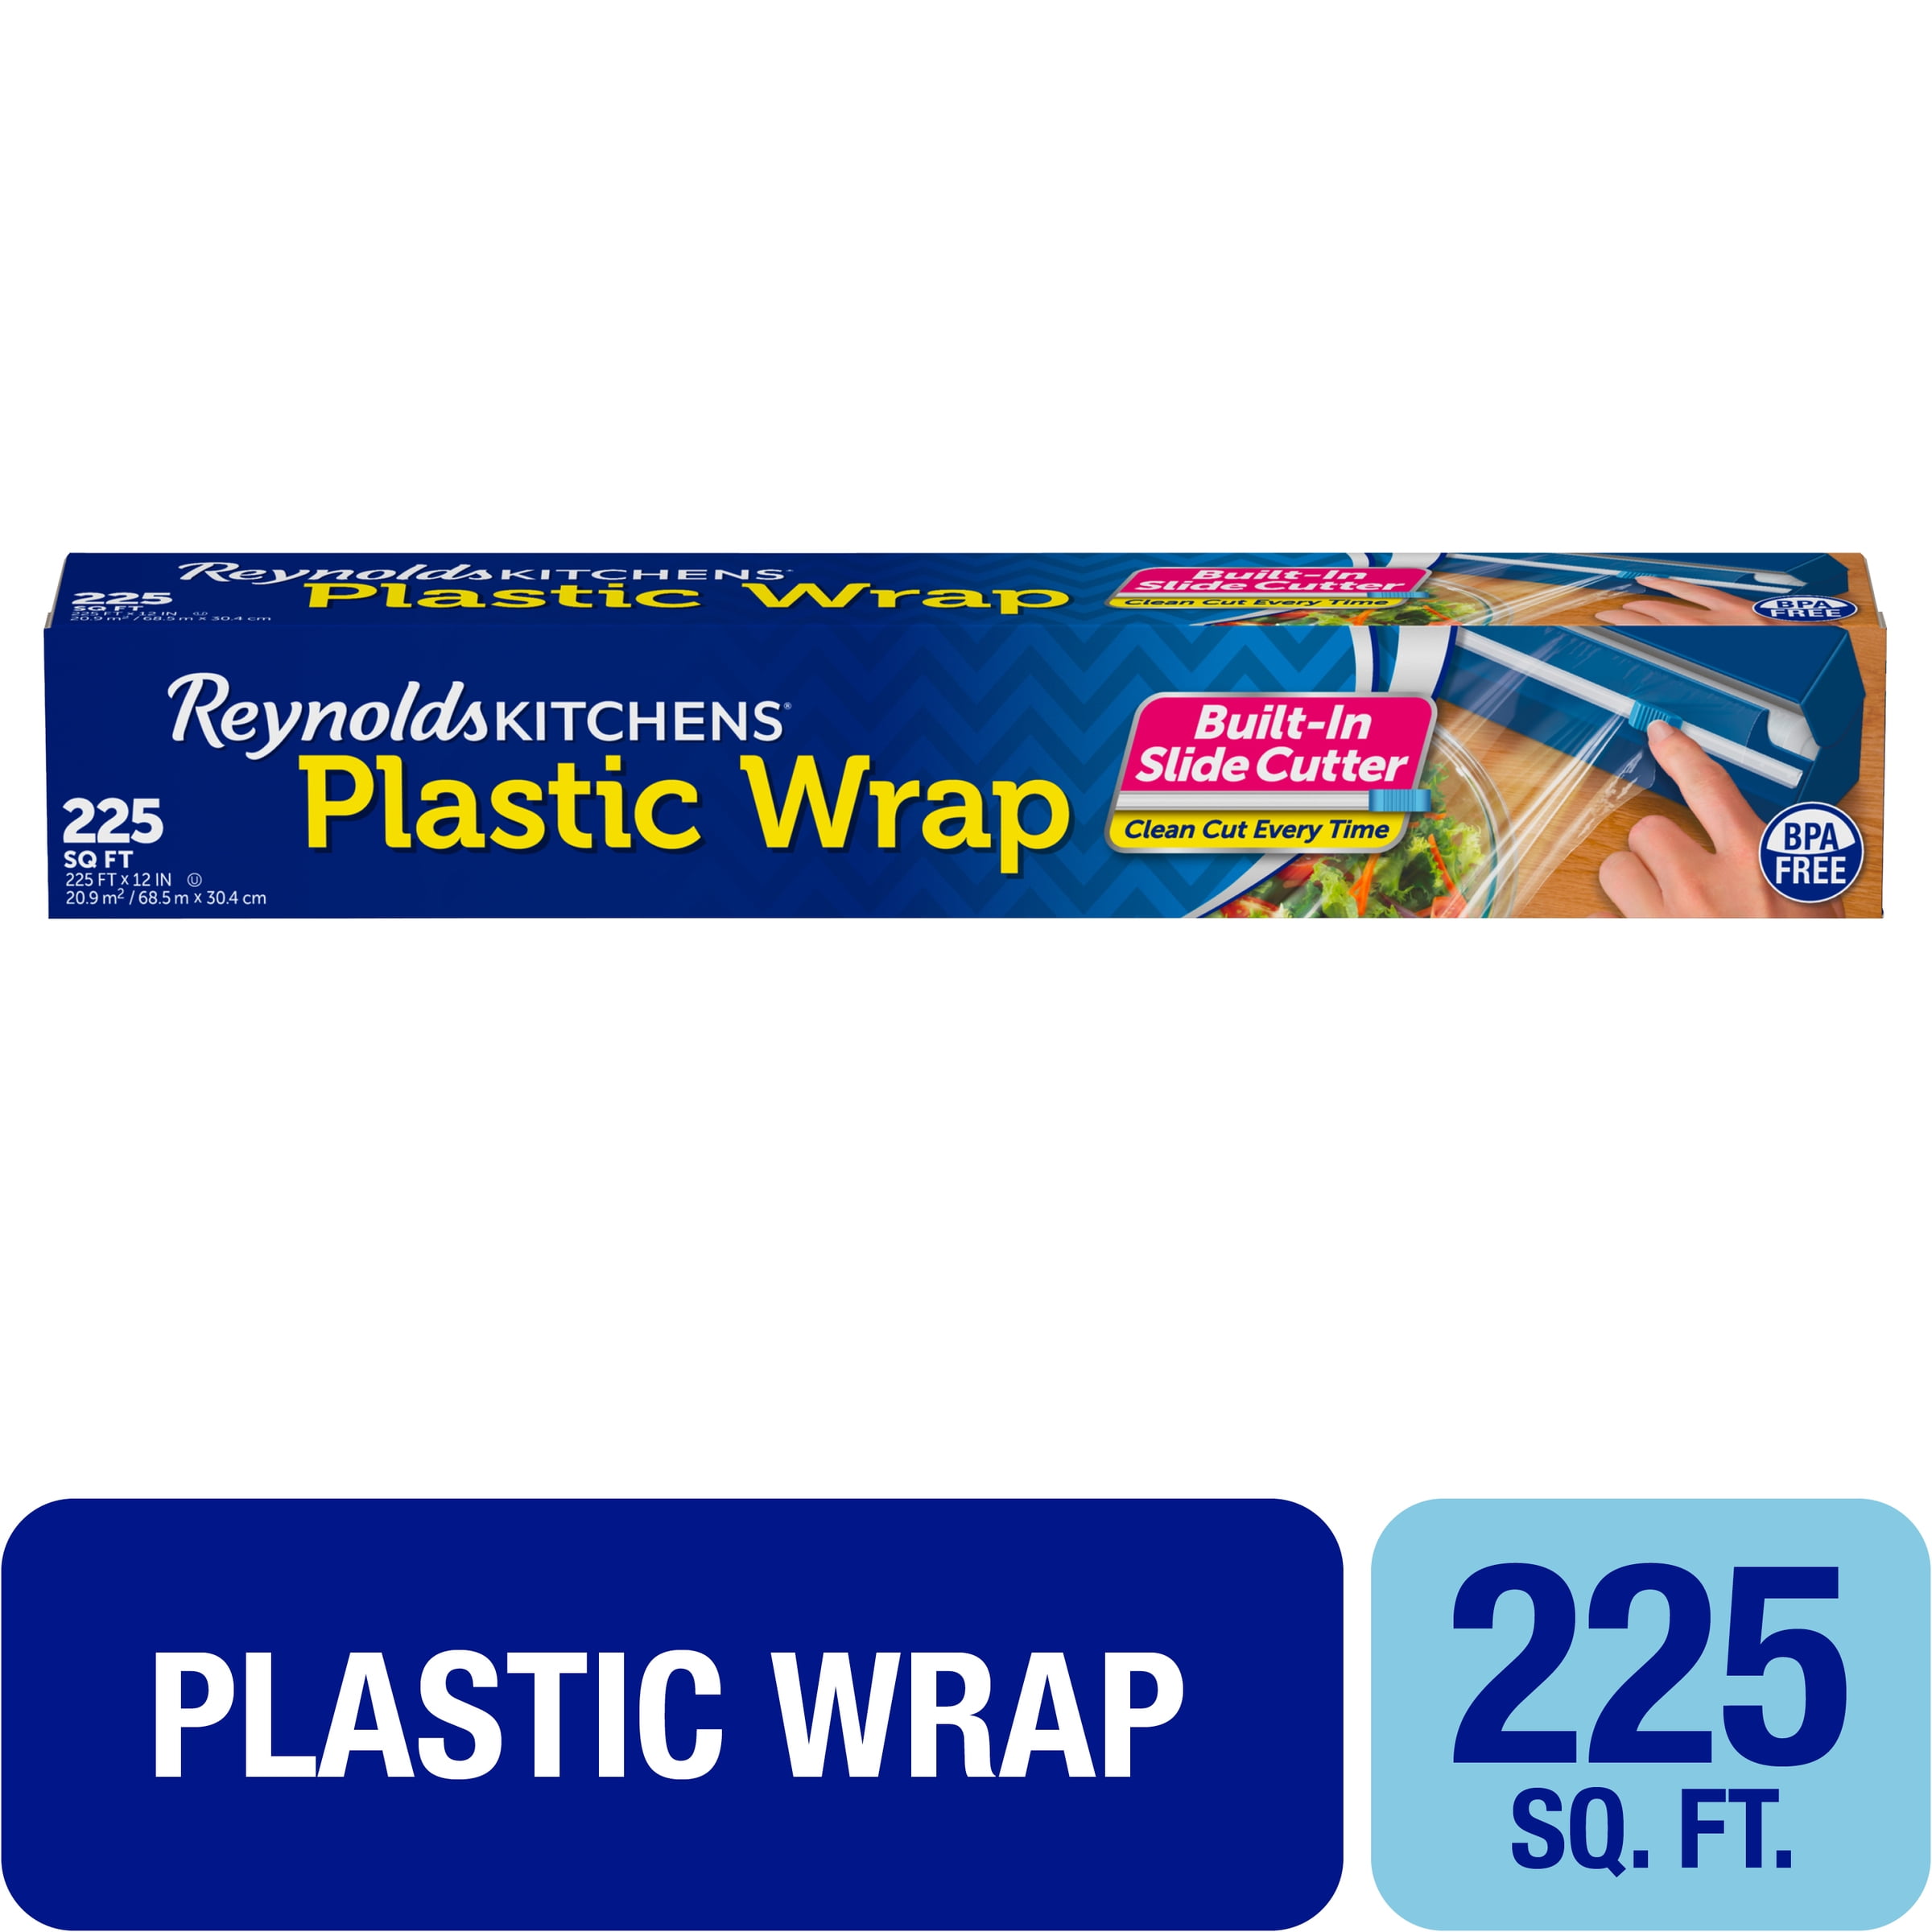 Reynolds introduces new line of quick cut plastic wrap